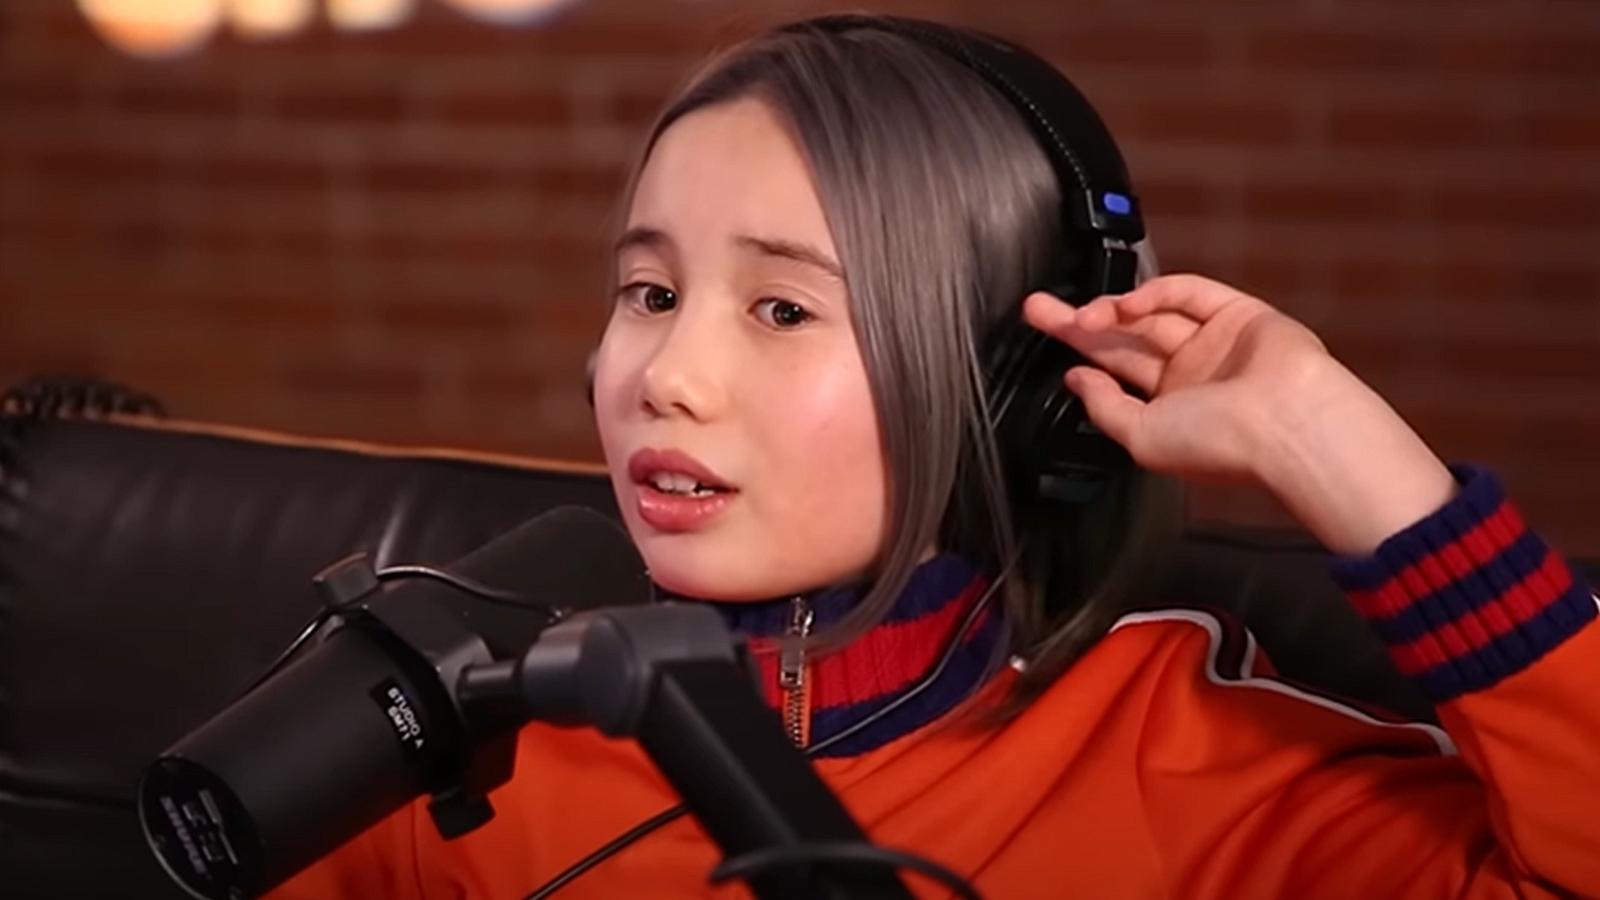 LiL Tay on an interview